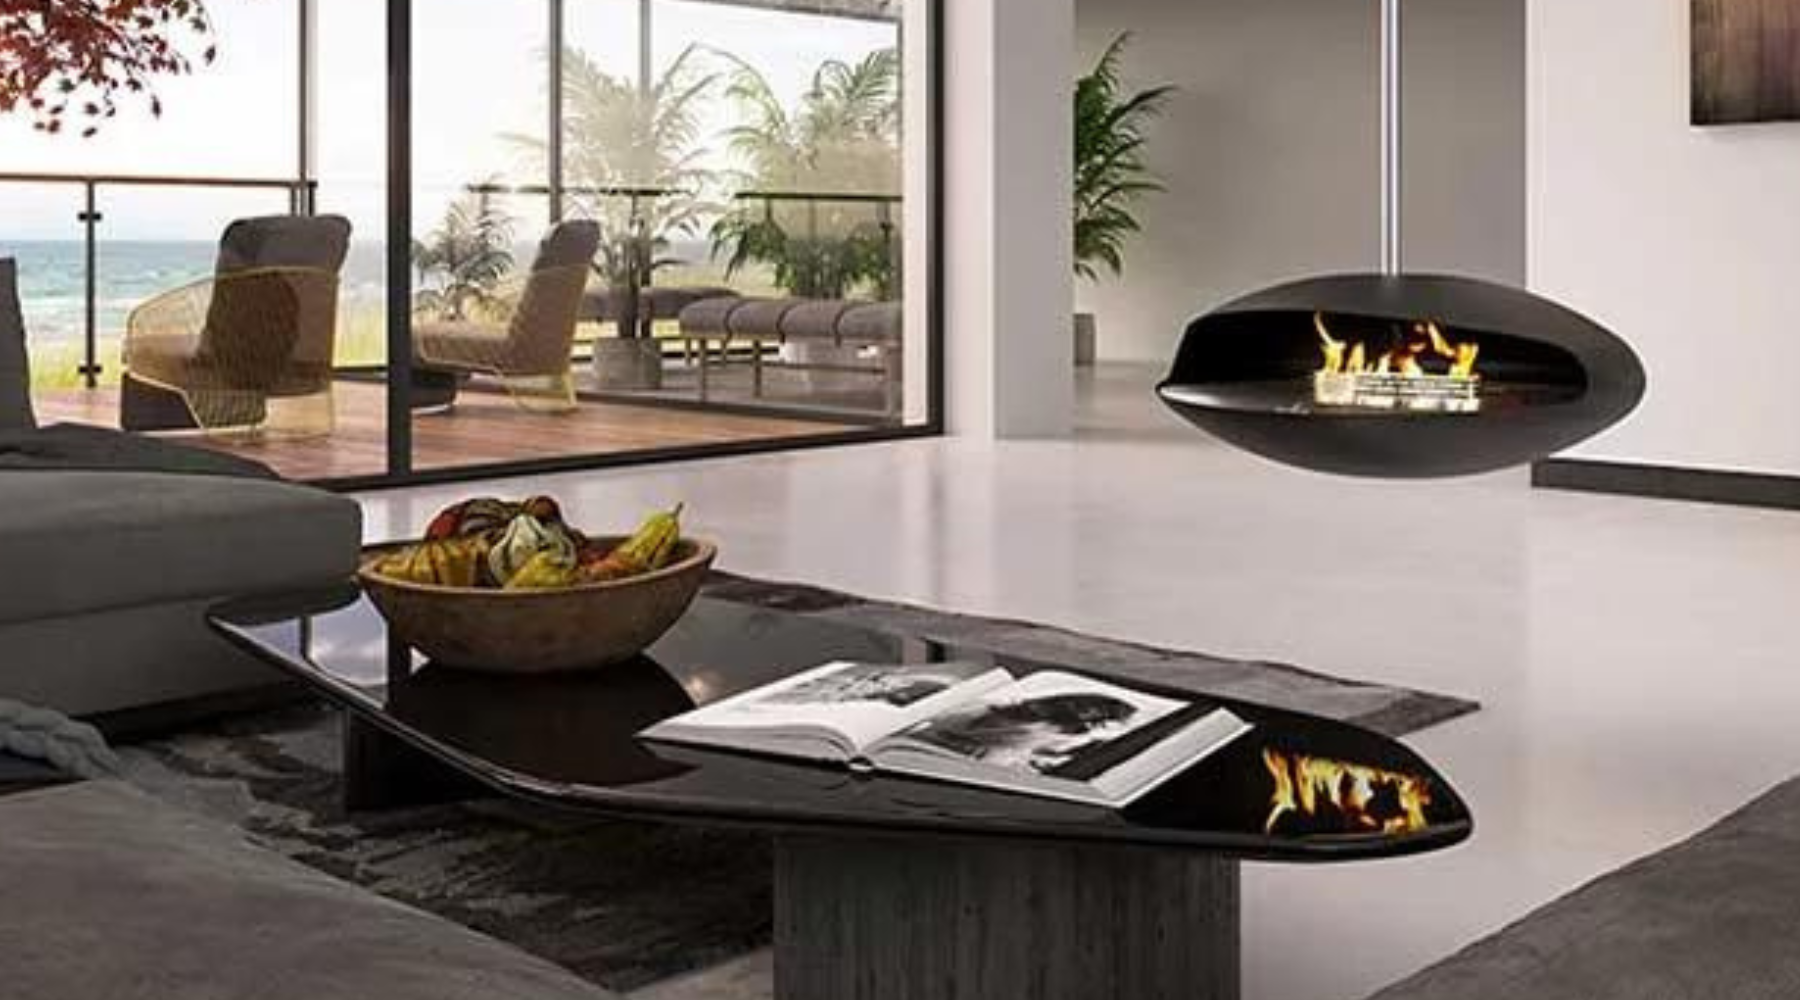 Pros and Cons of Electric Fireplaces vs. Bio Ethanol Fireplaces